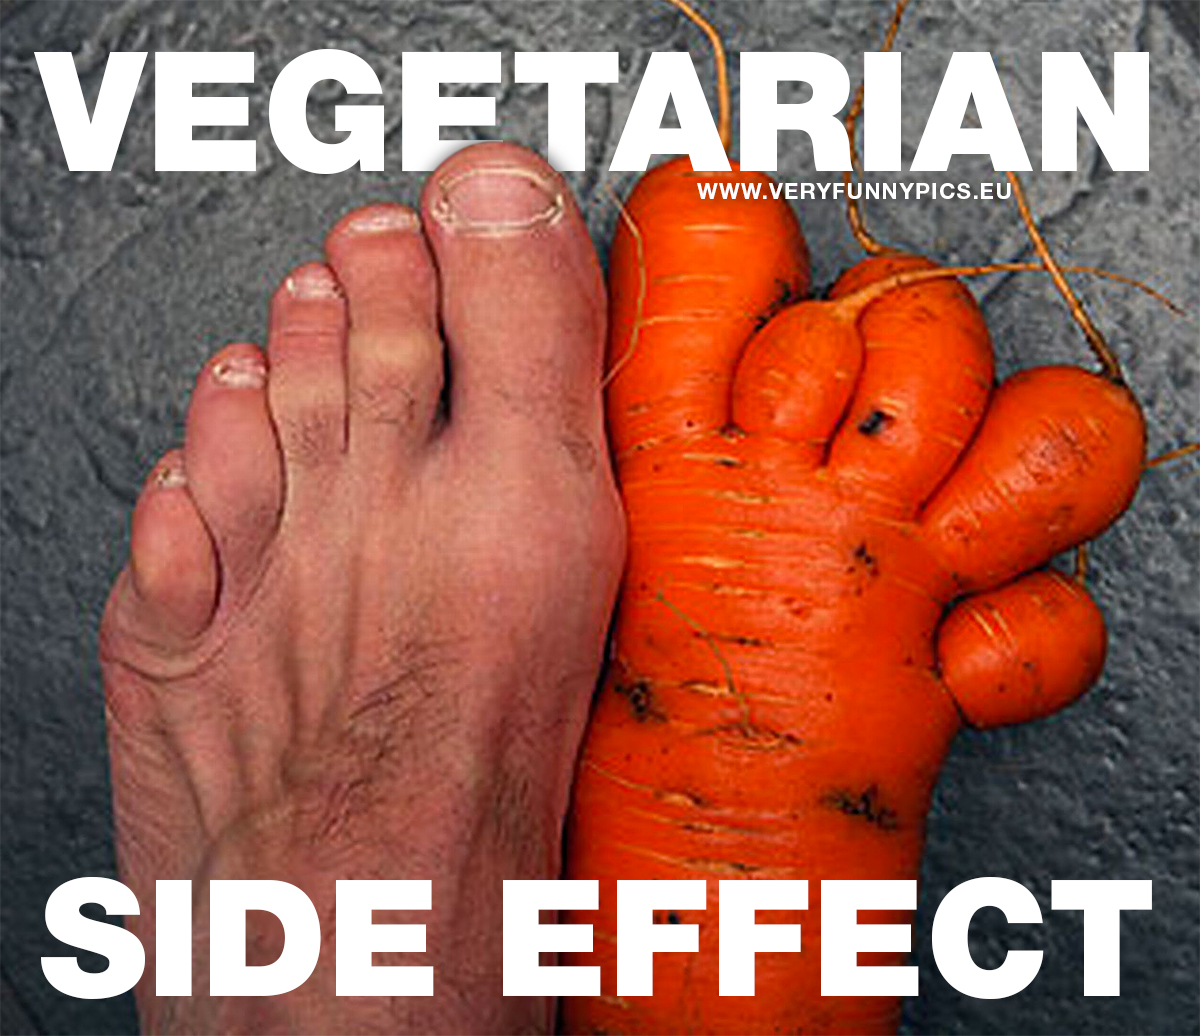 A foot and a carrot that looks like a foot - Vegetarian side effect